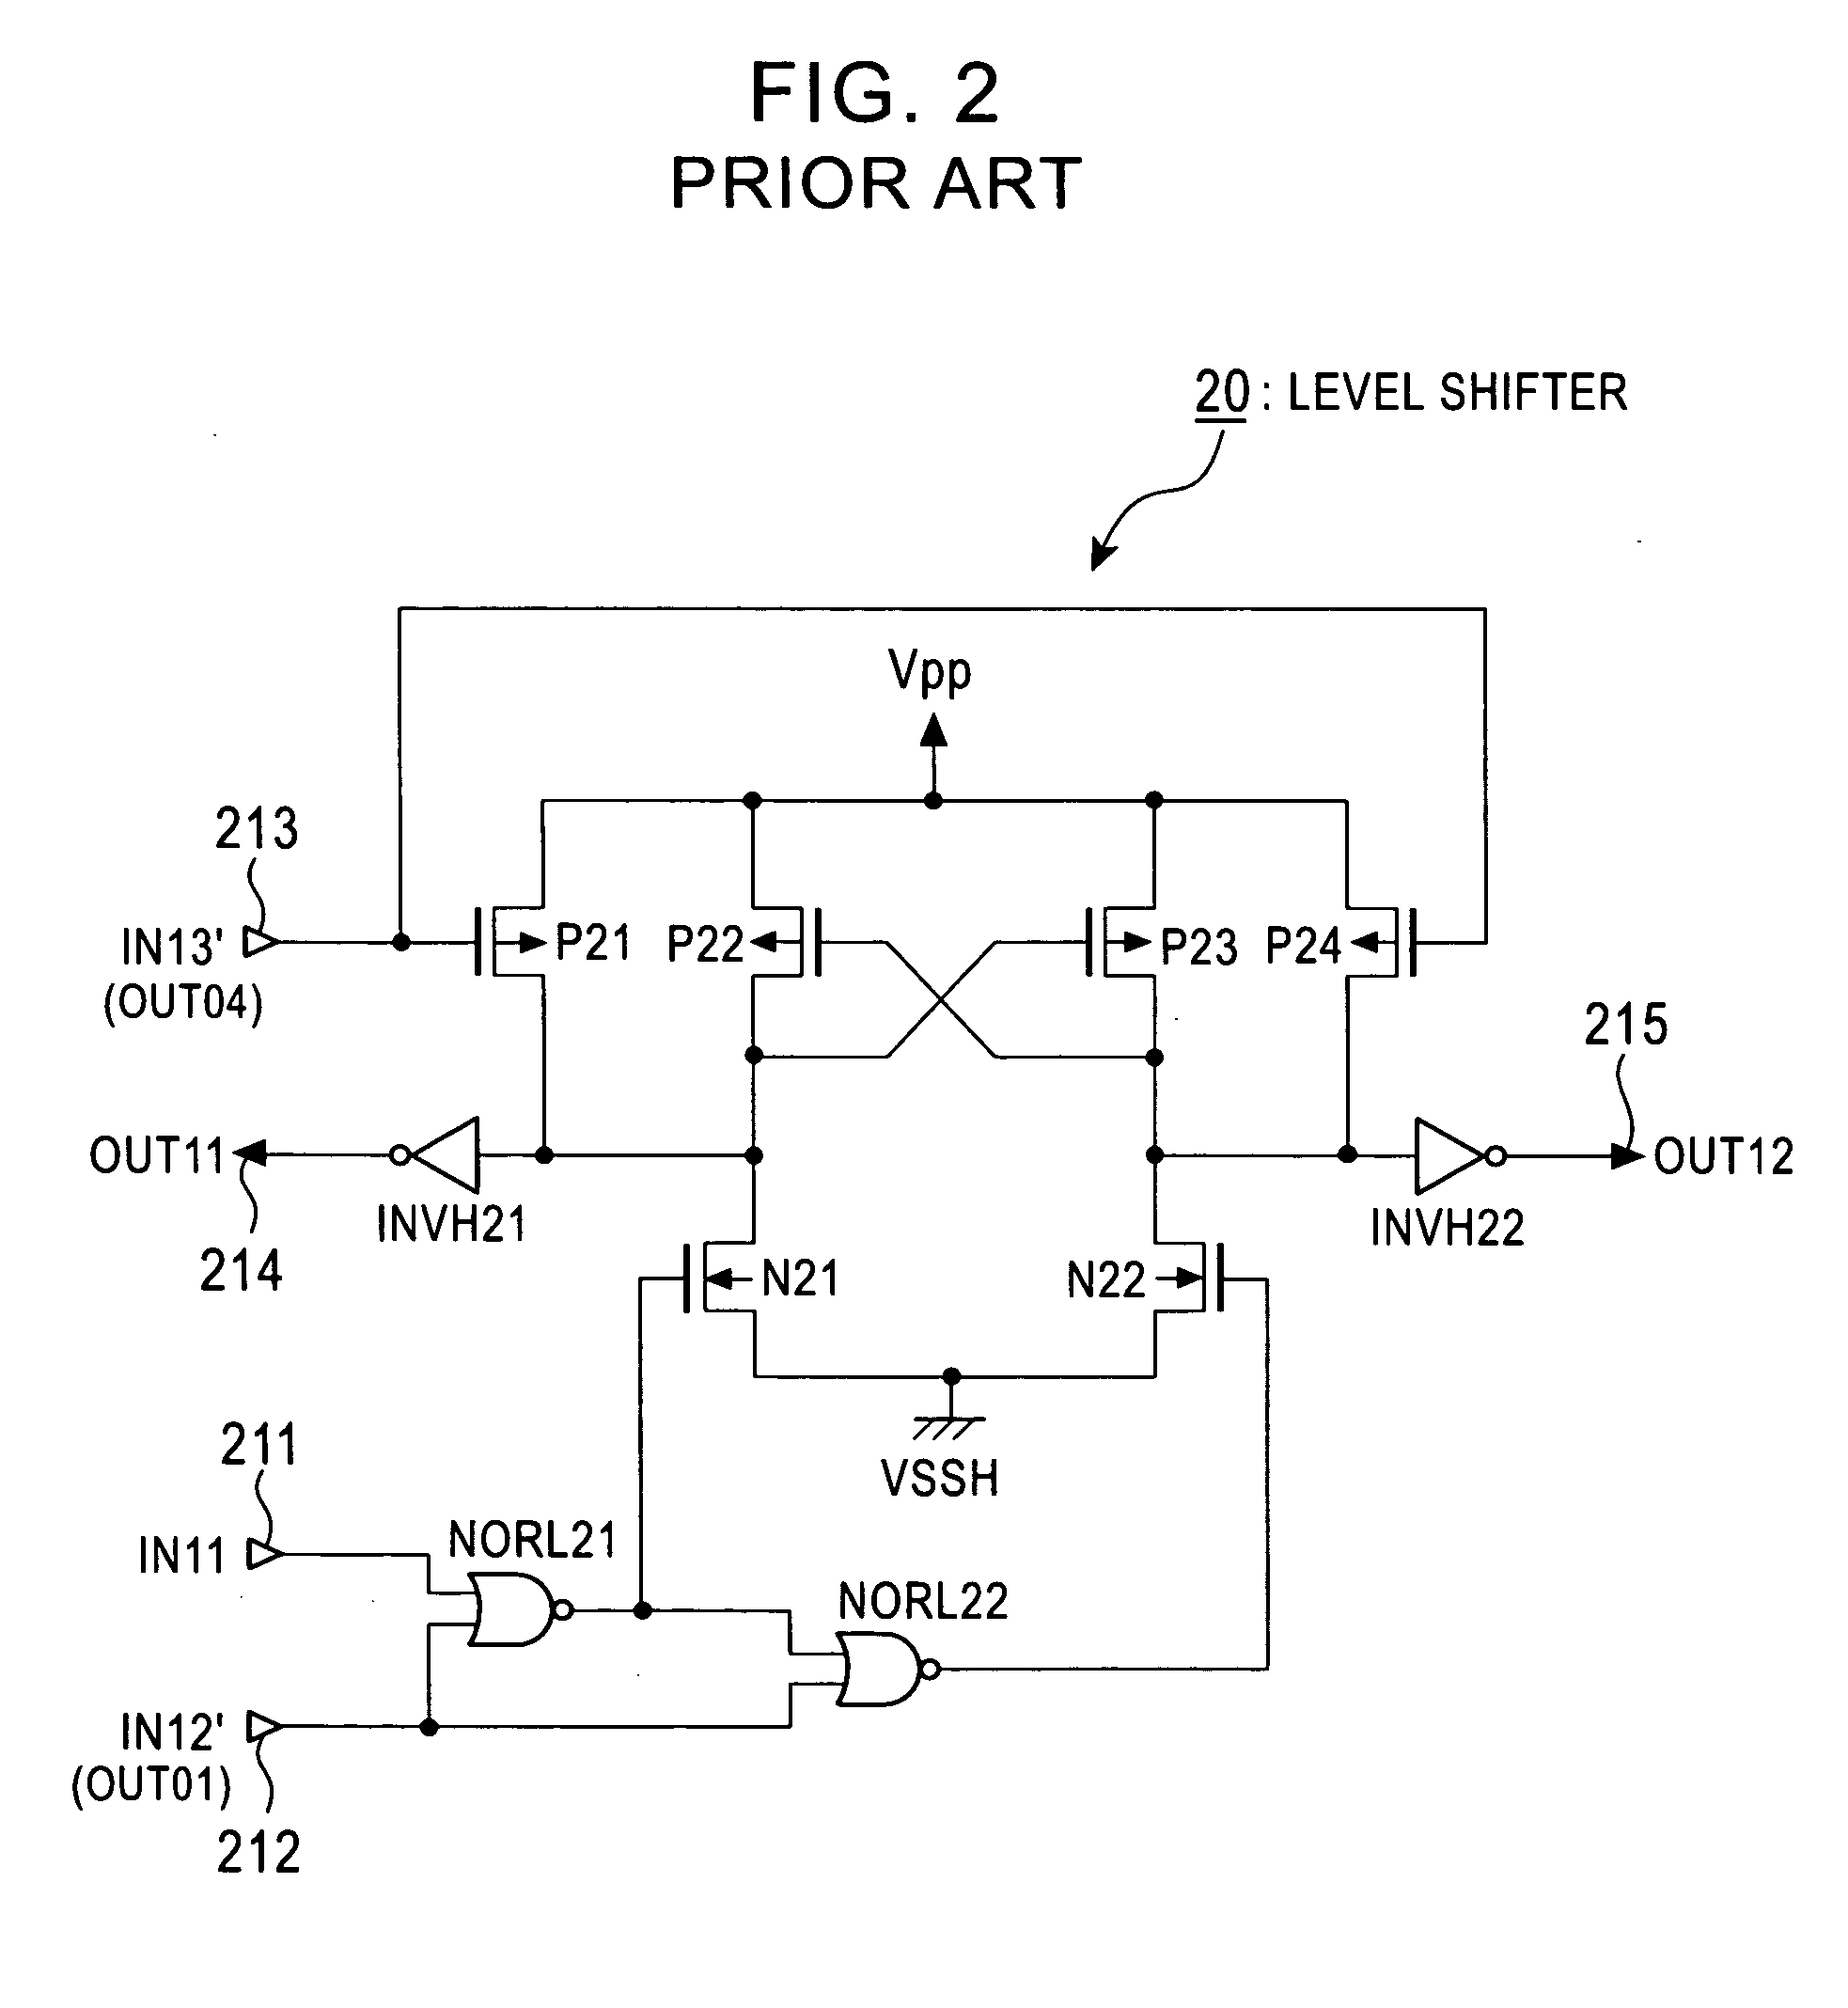 Signal generator circuit and level shifter with signal generator circuit